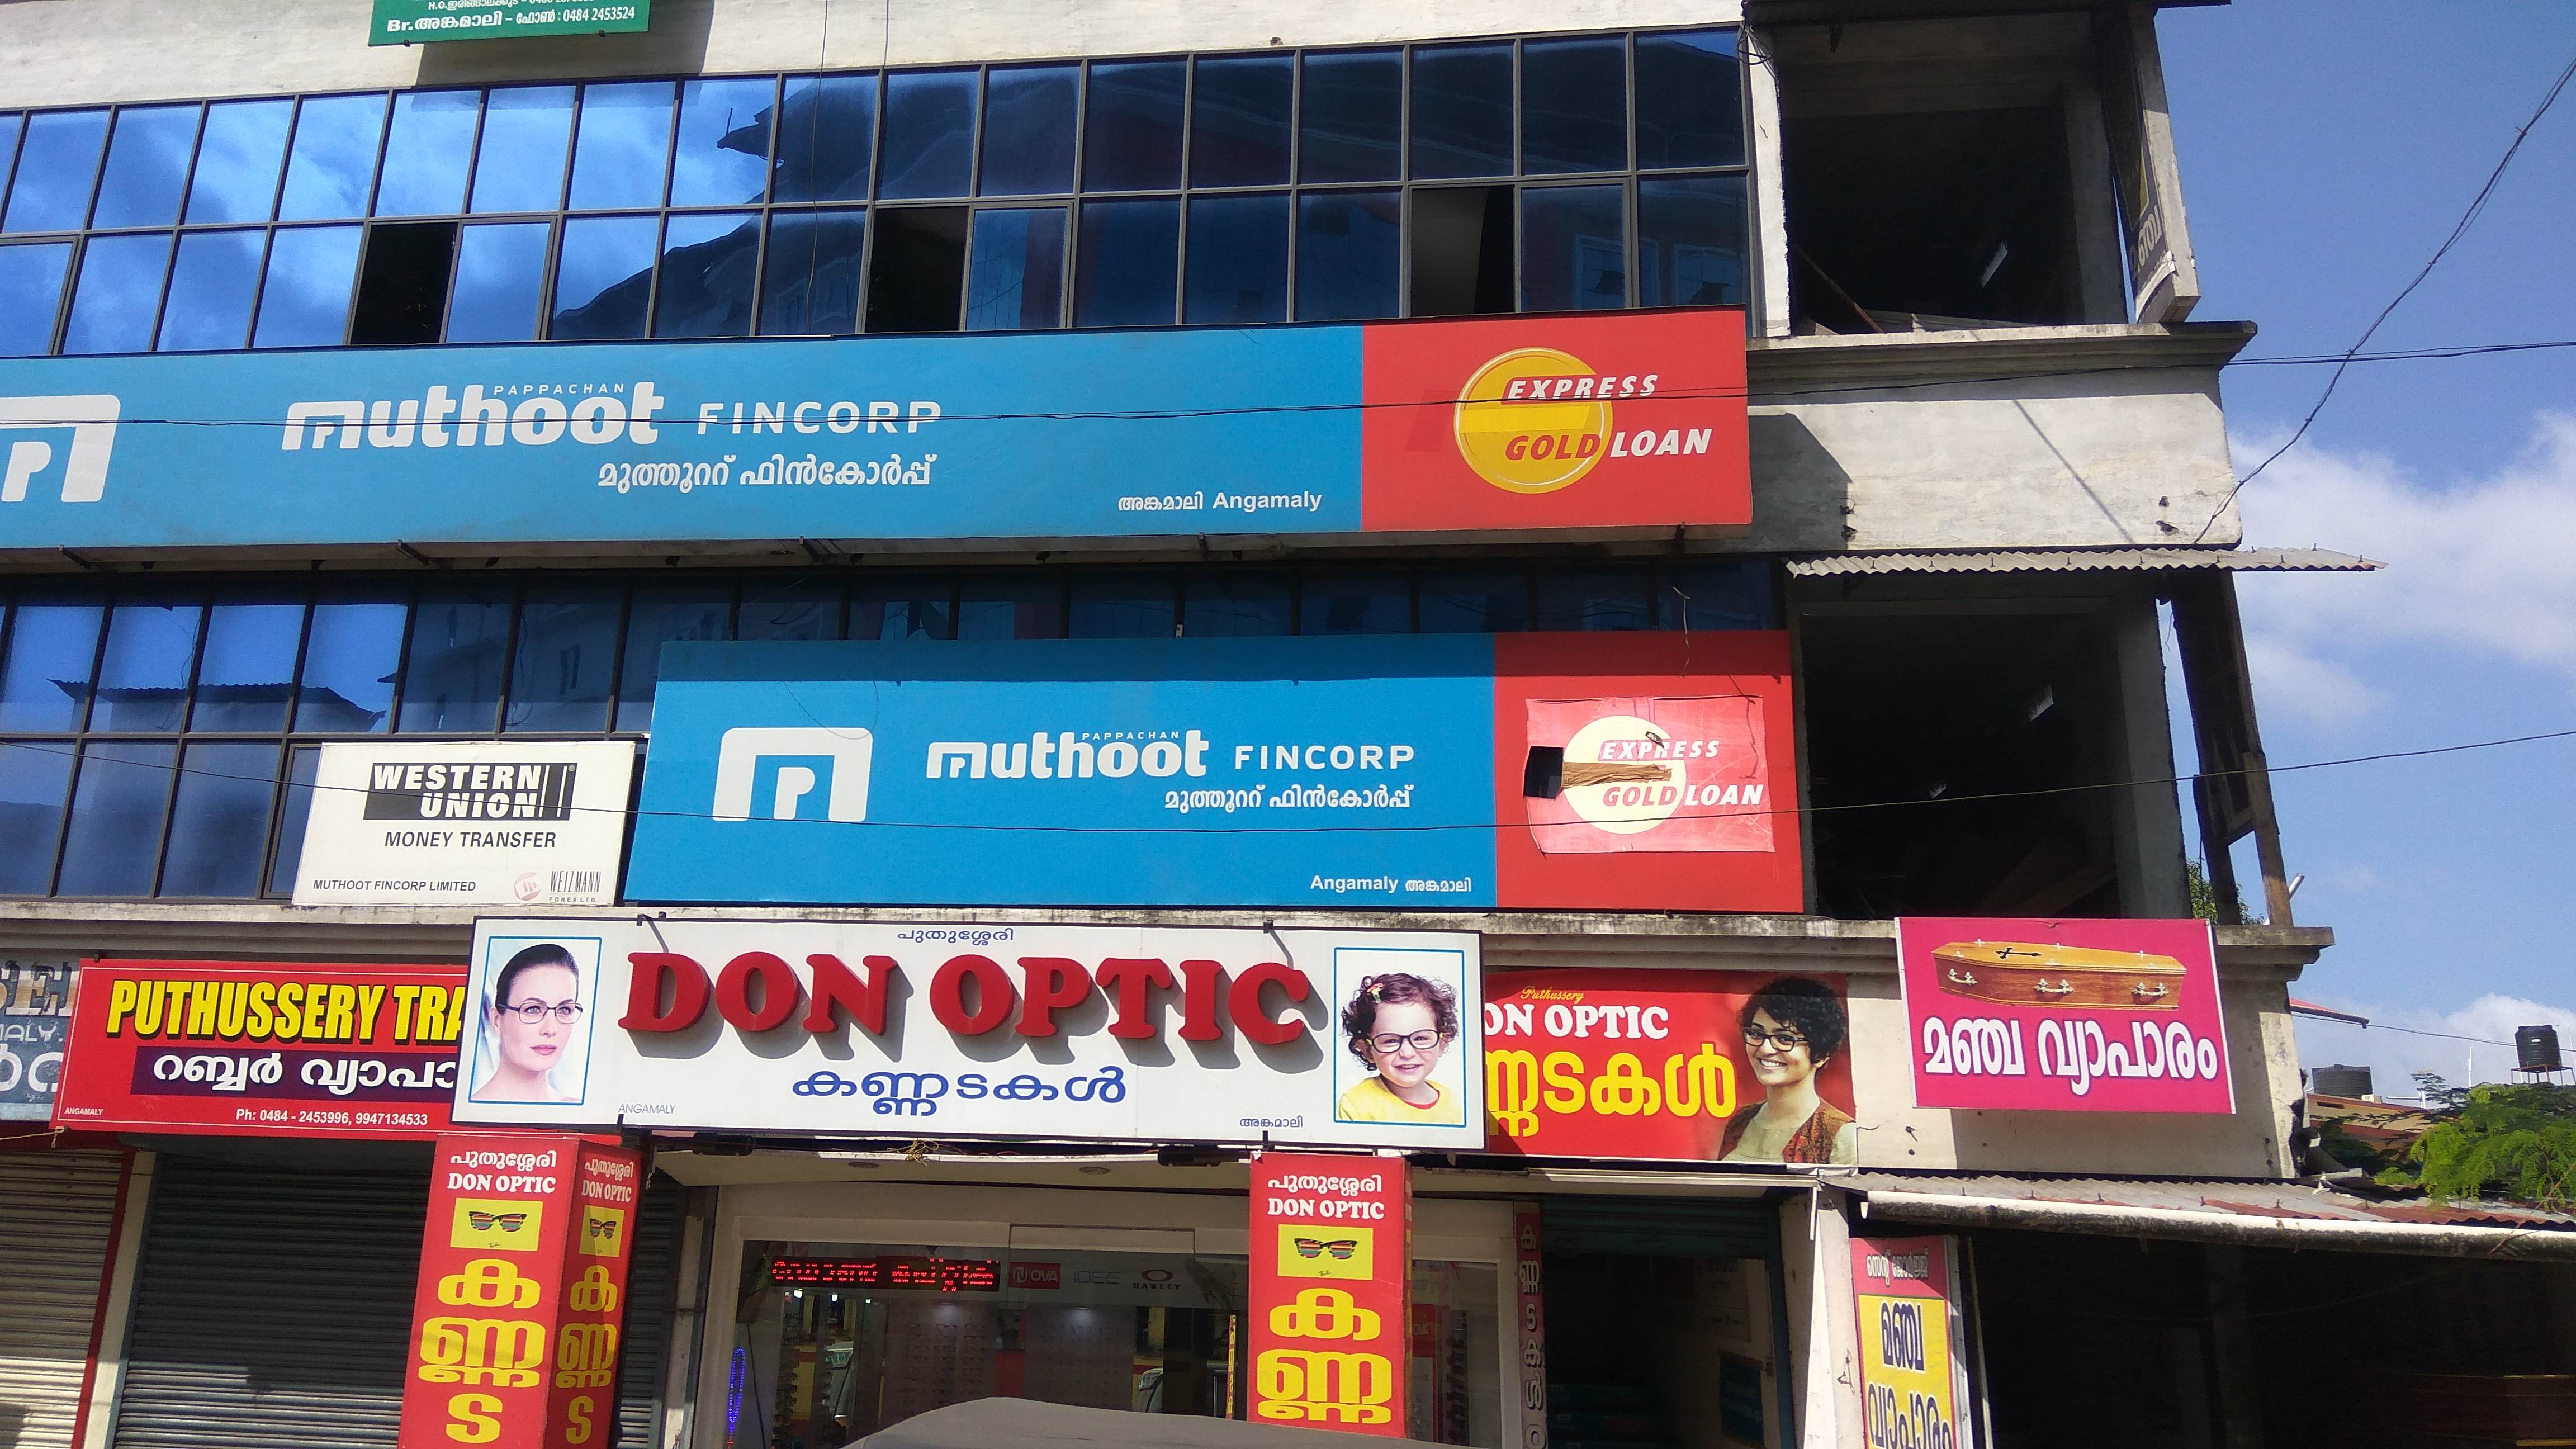 Muthoot Fincorp Gold Loan Services in Angamaly, Angamaly, Kerala